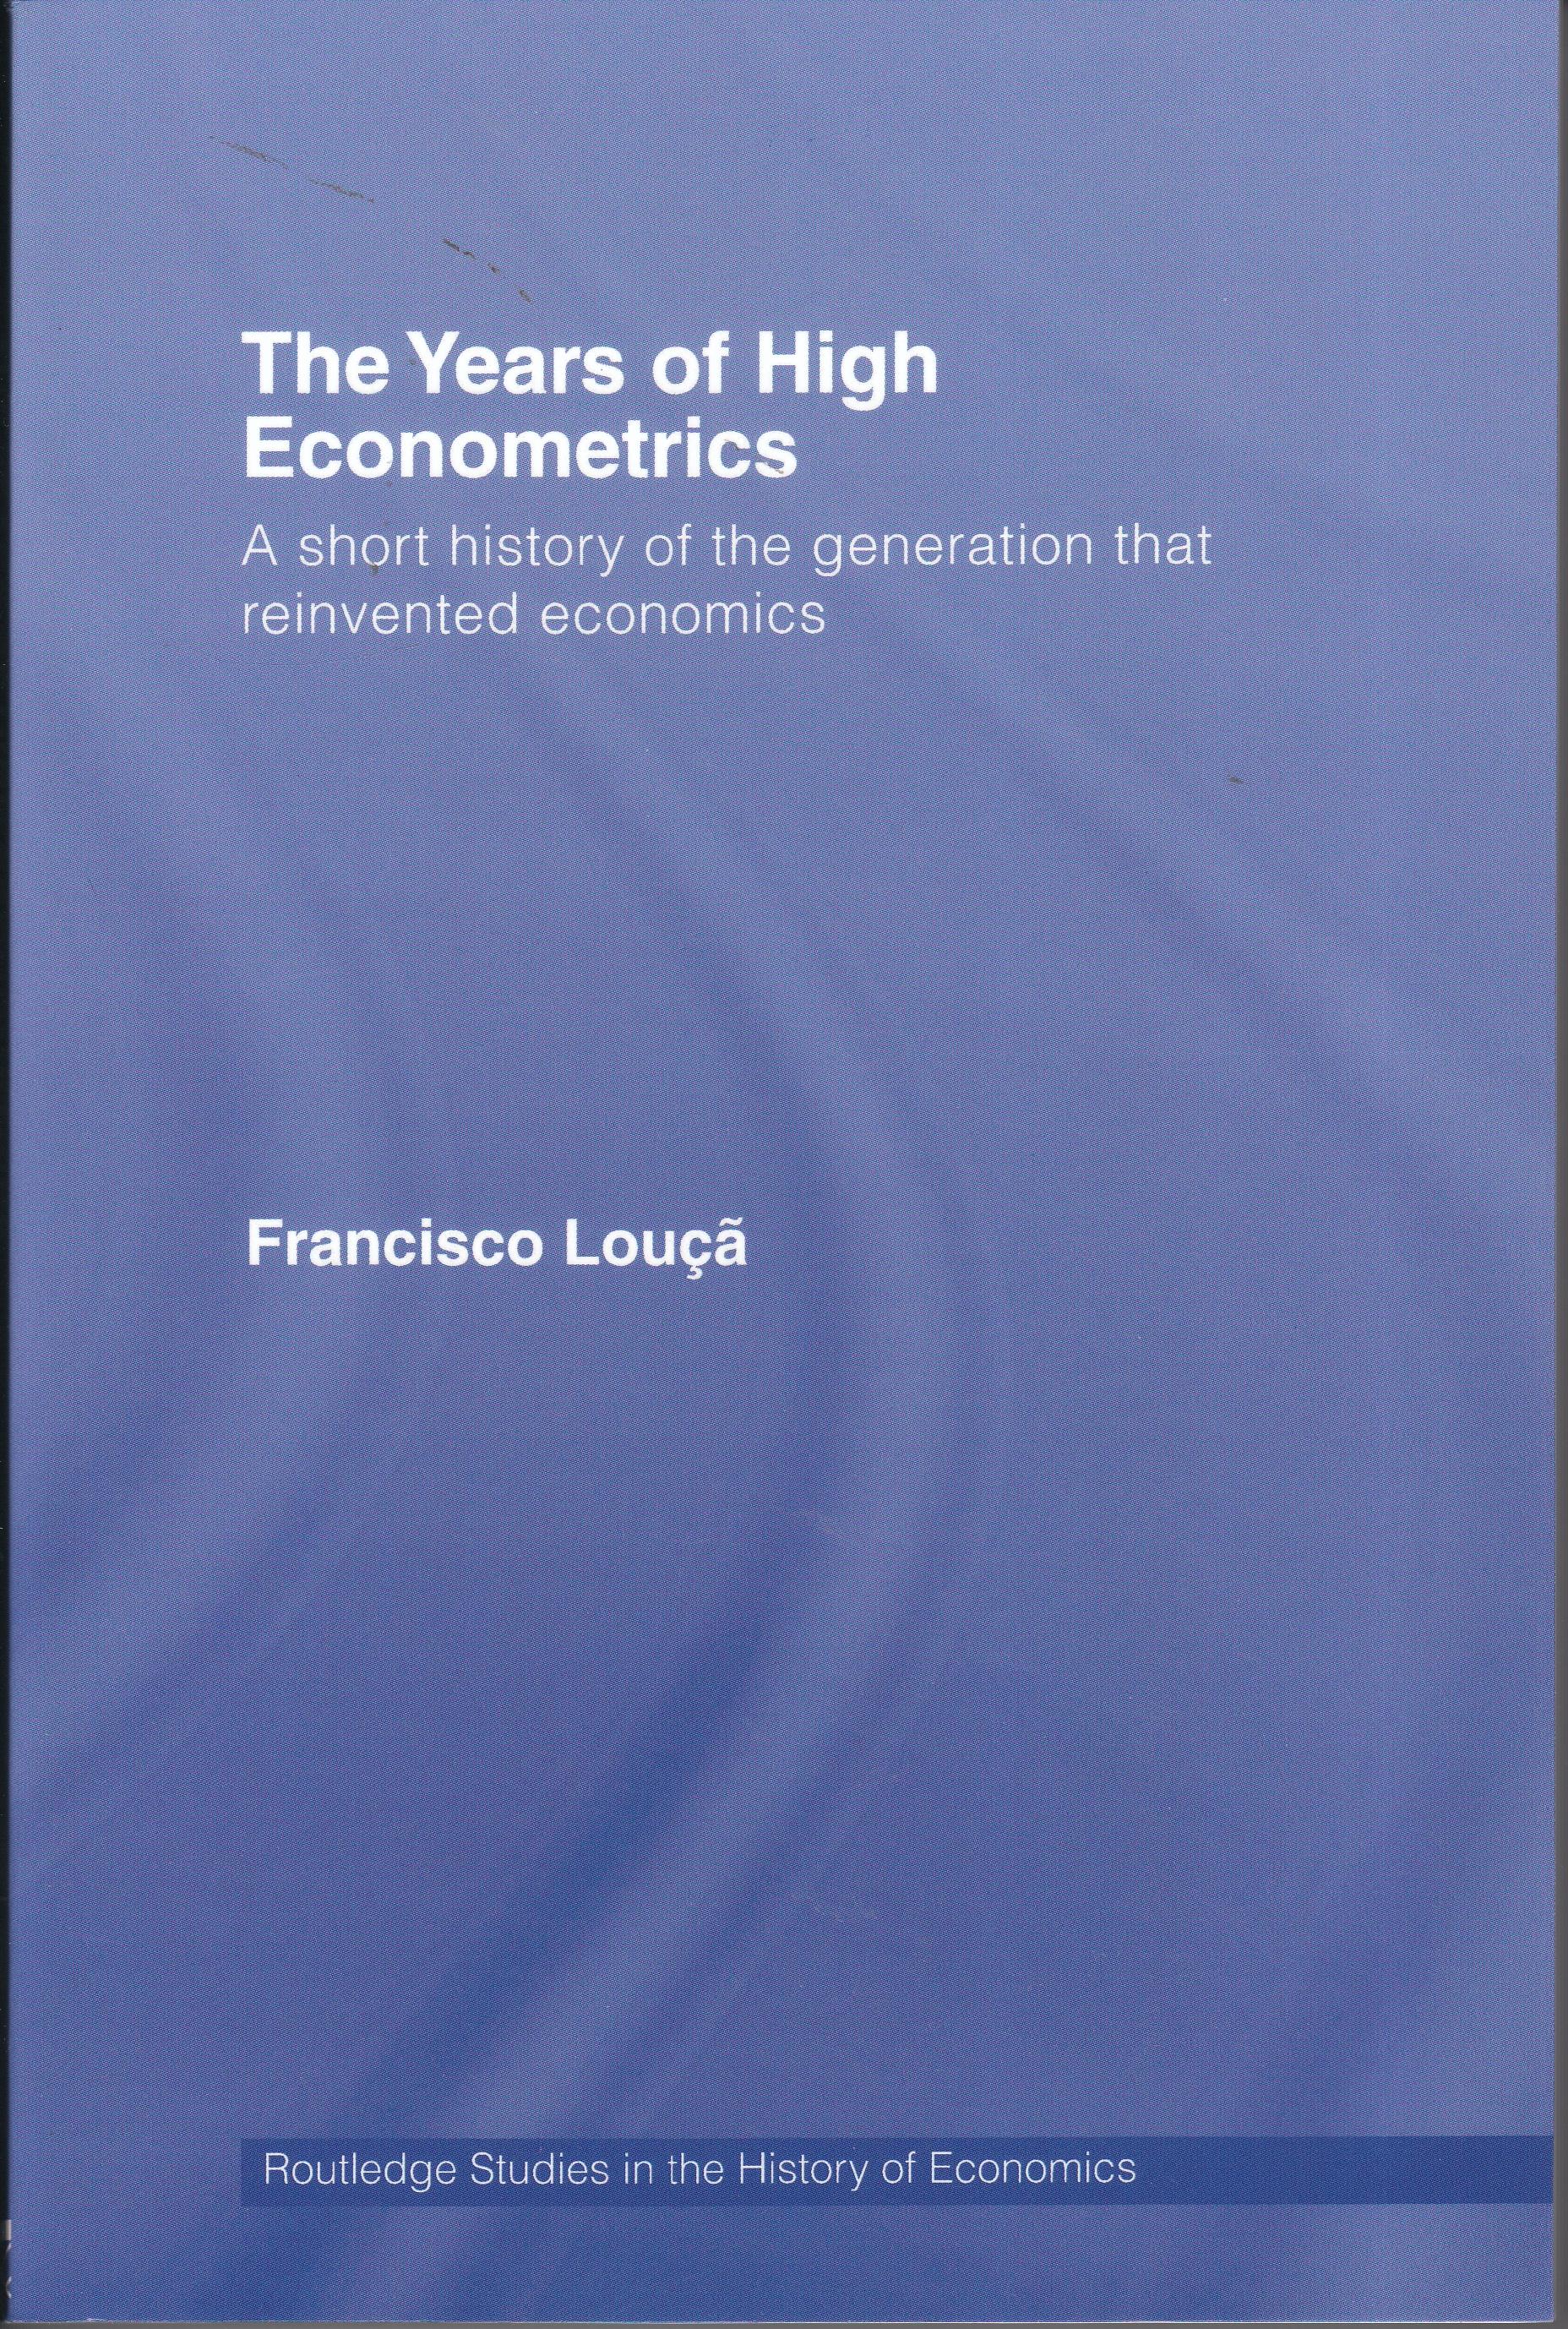 The Years of High Econometrics. "A short history of the generation that reinventes economics."